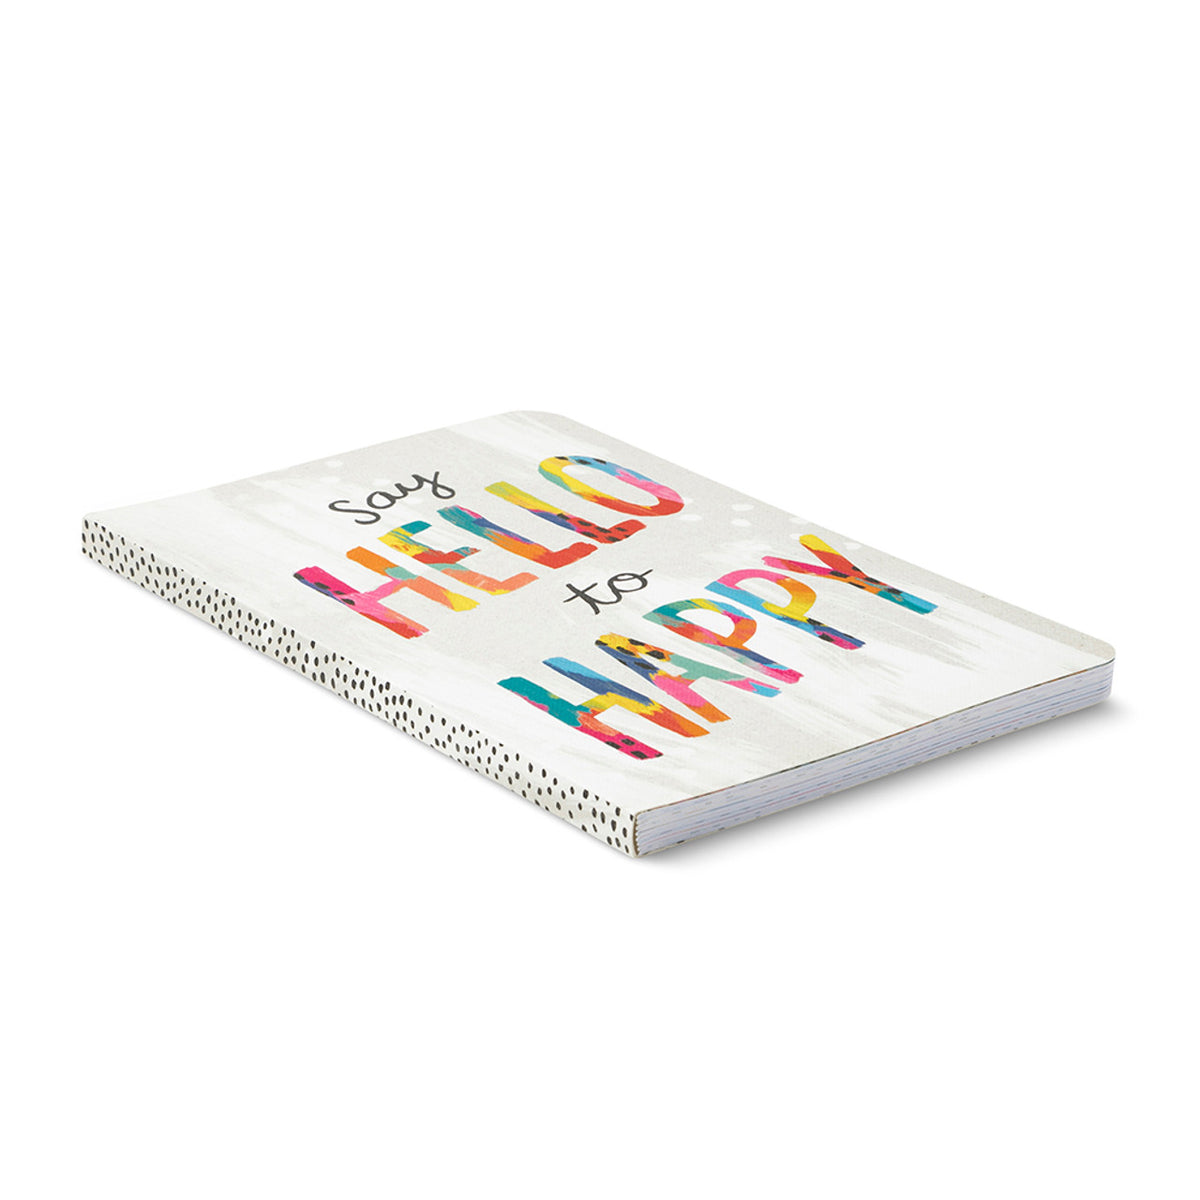 Say Hello To Happy Write Now Softcover Journal